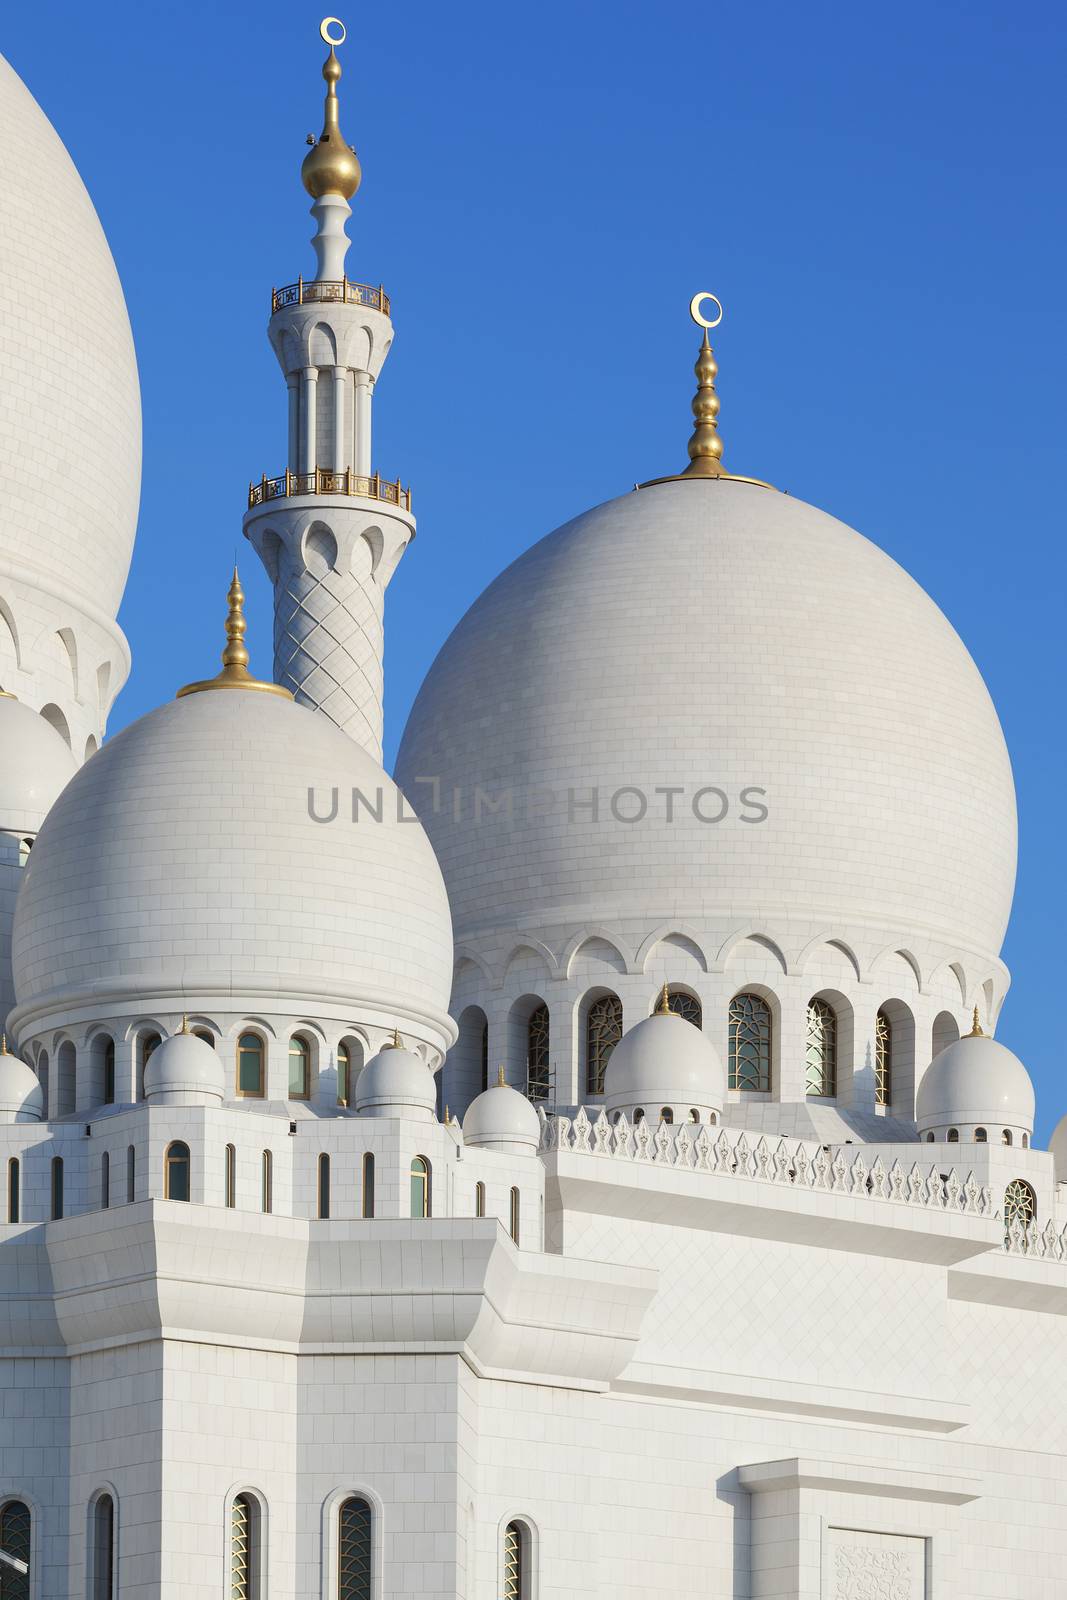 Part of Sheikh Zayed Grand Mosque with blue sky, UAE